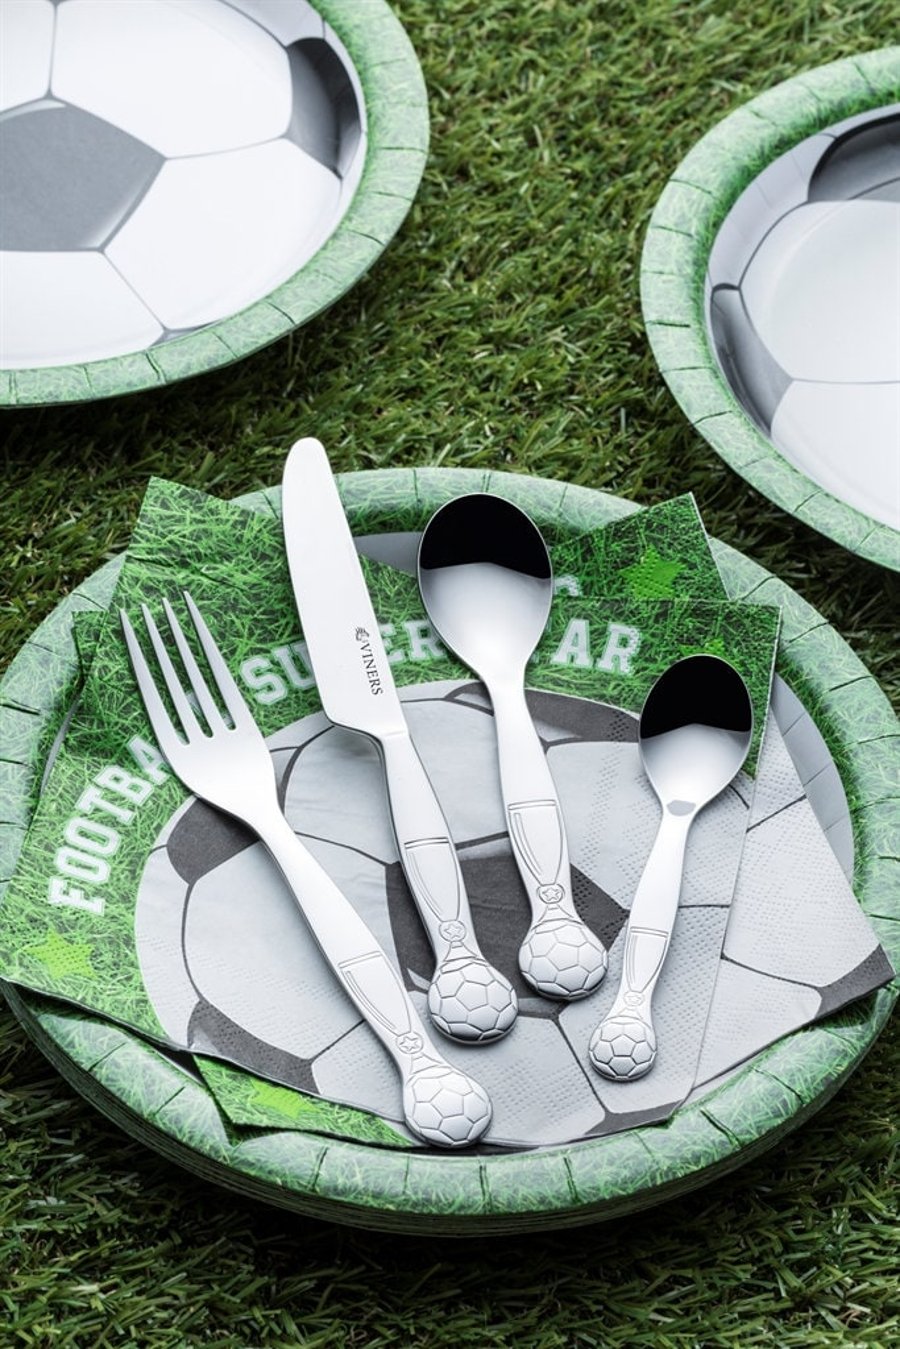 Personalised Engraved Childrens Football Cutlery Set in Presentation Box